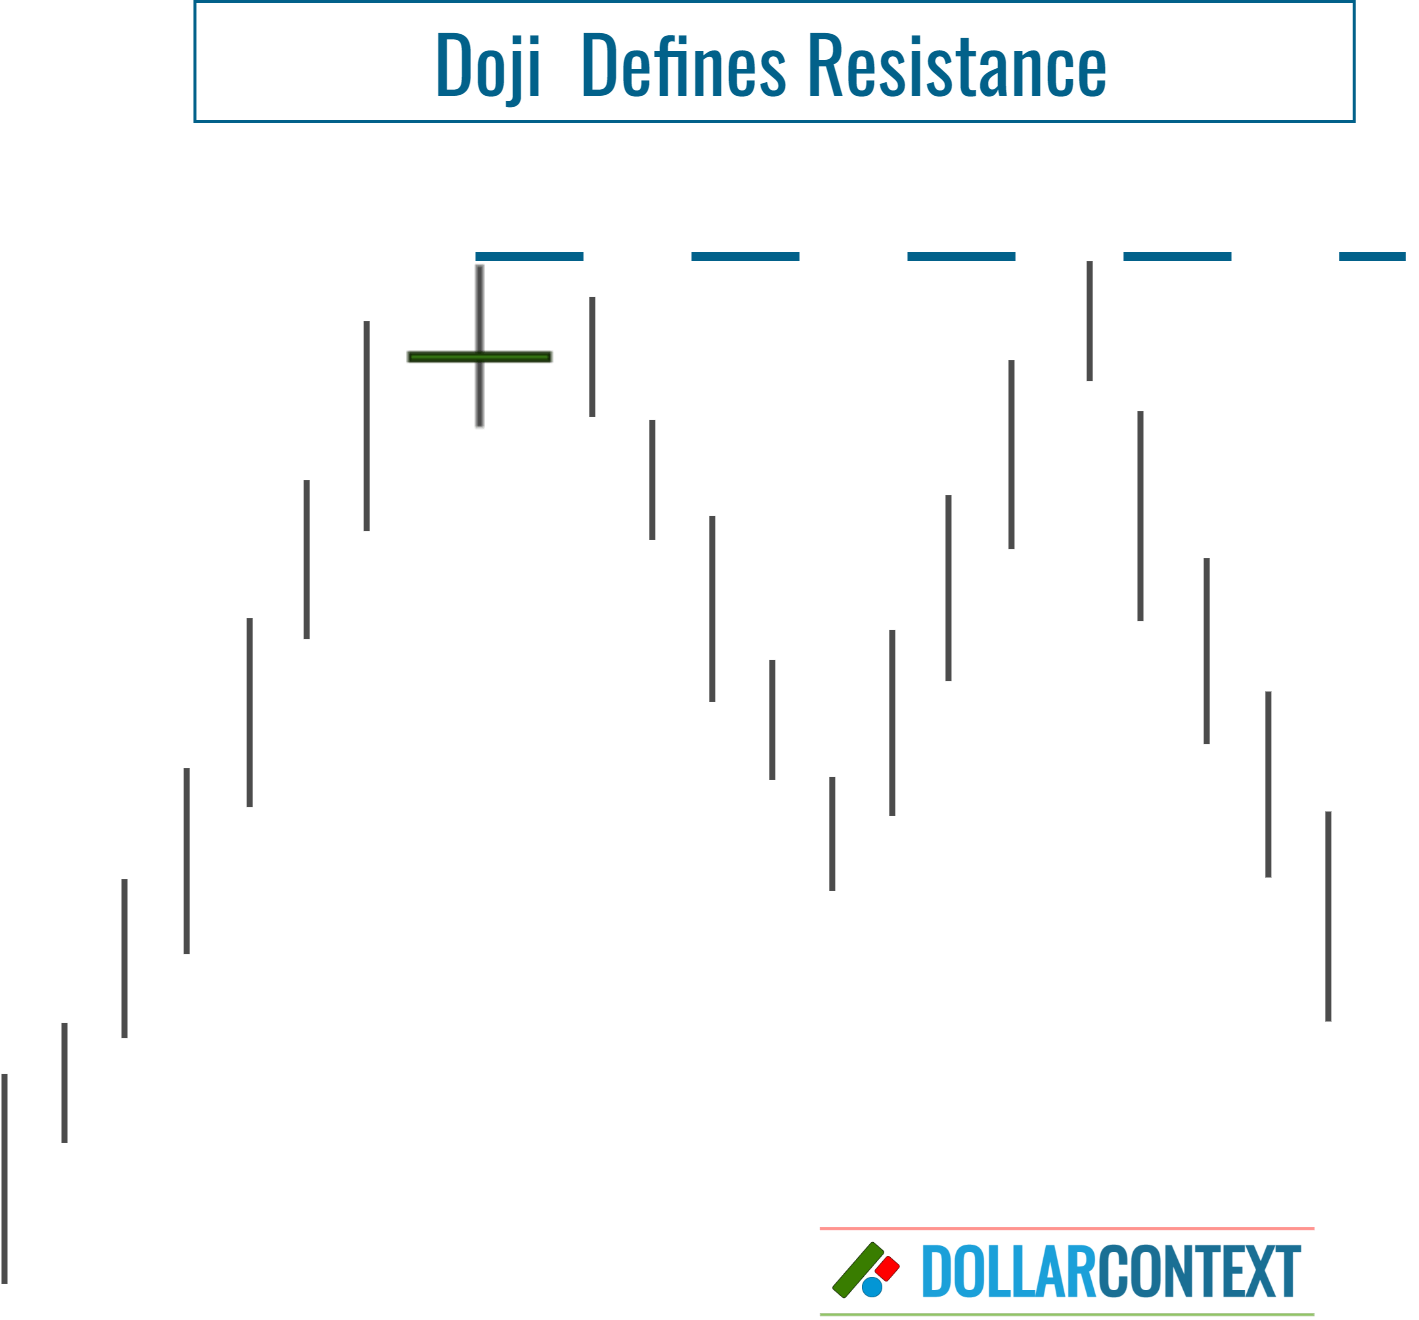 Doji Defines a New Resistance Zone After an Uptrend